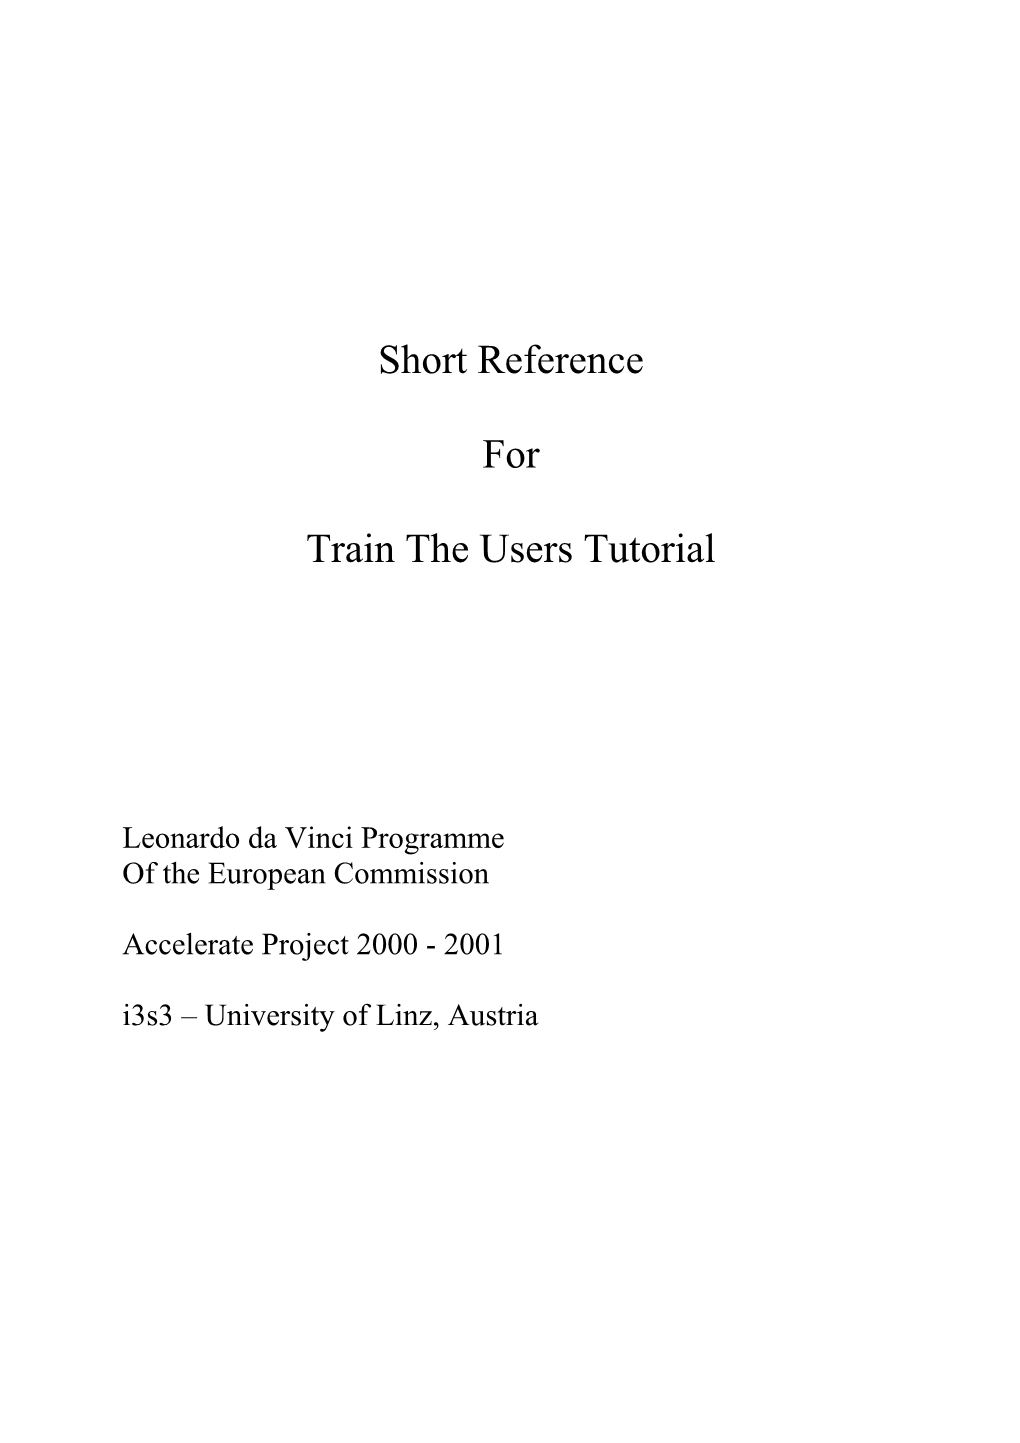 Train the Users Tutorial